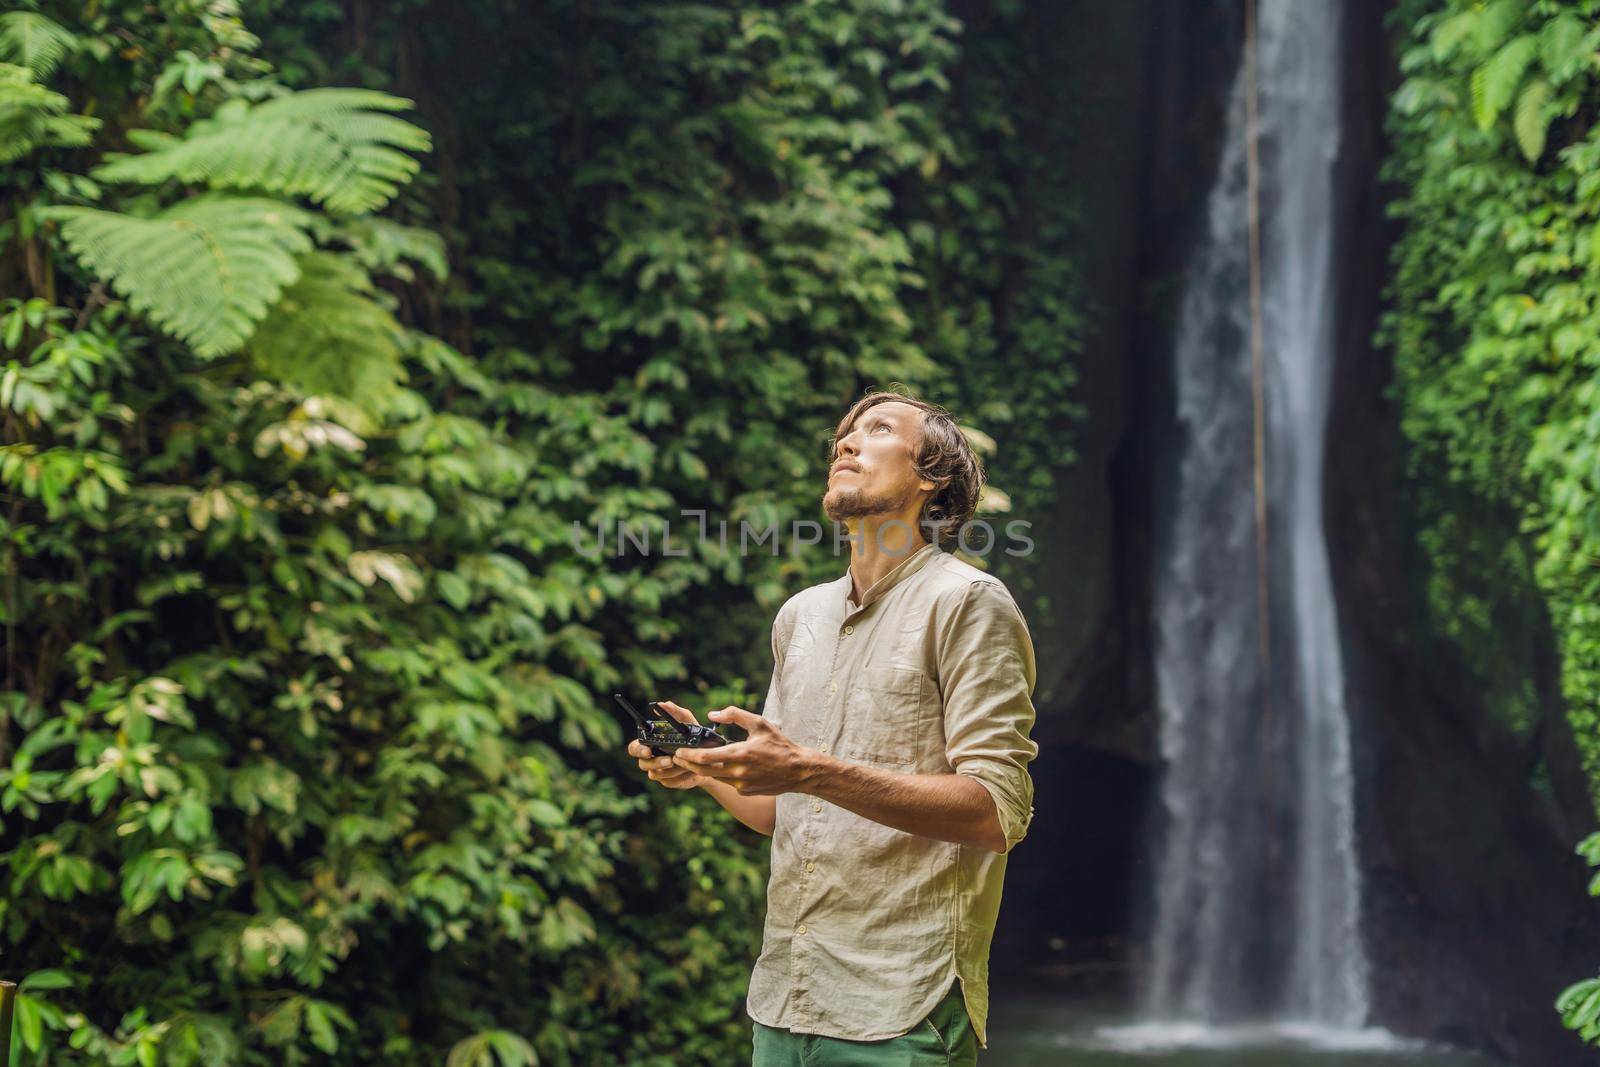 The man controls the drone against the background of the forest and the waterfall.